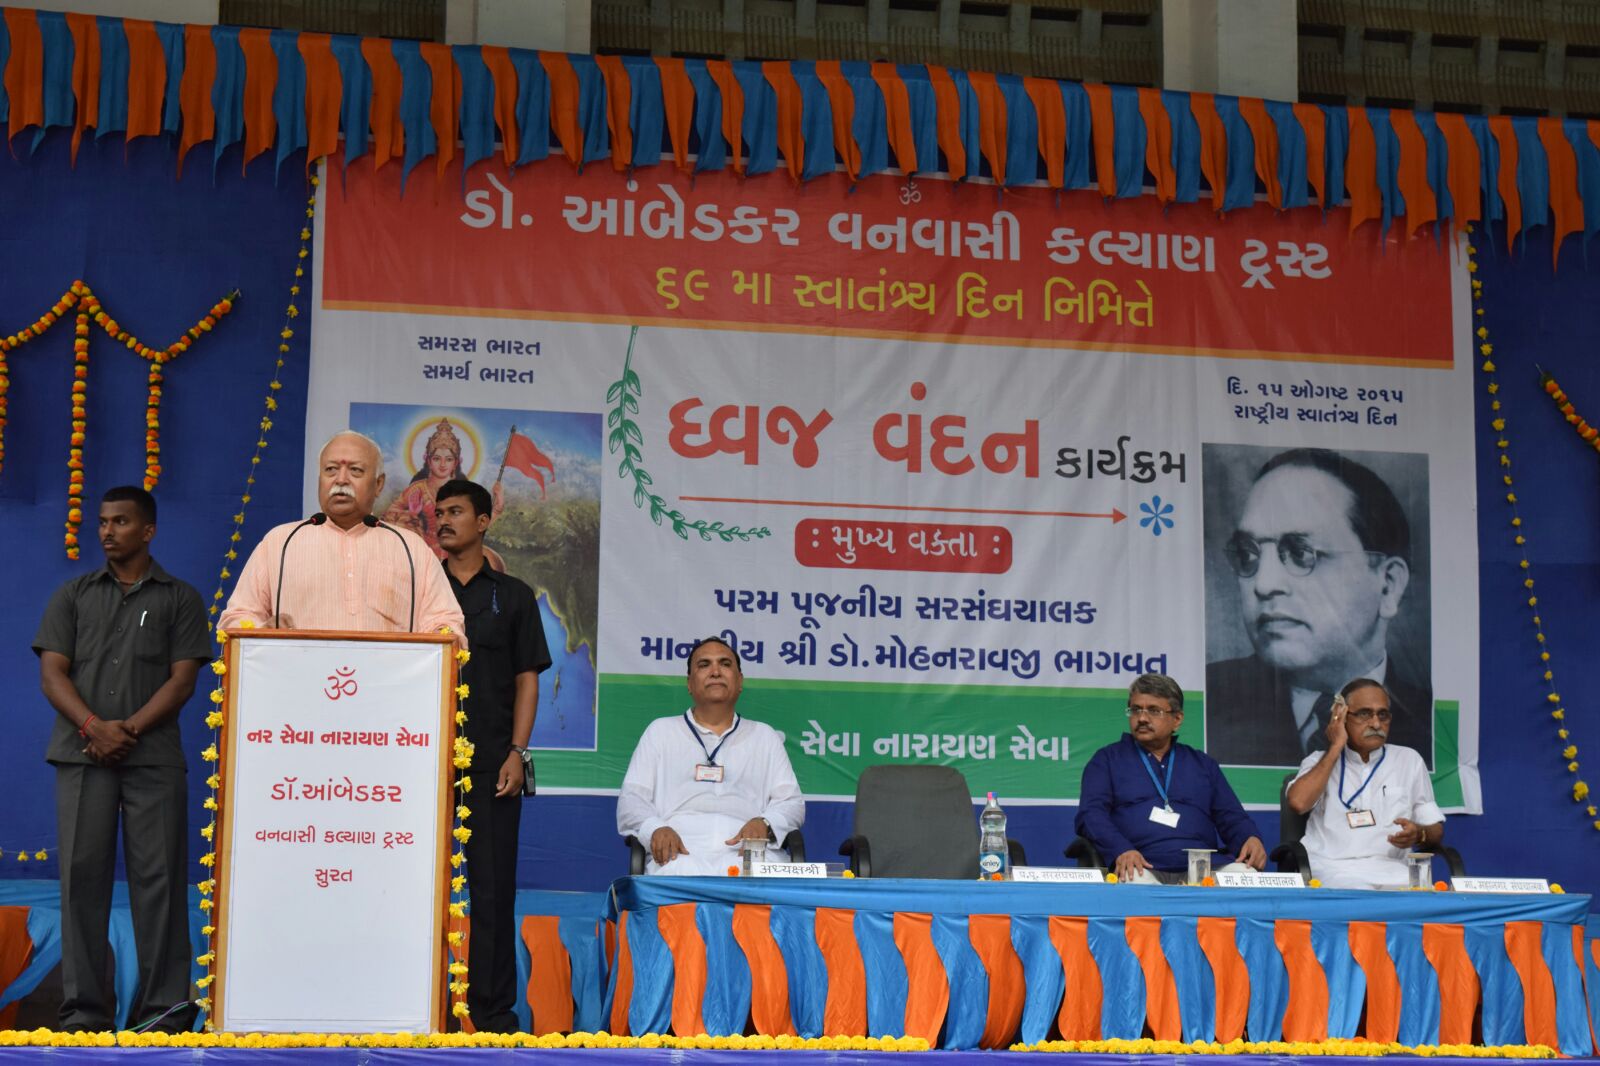 RSS Sarasanghachalak Mohan Bhagwat delivering Independence day speech at Surat